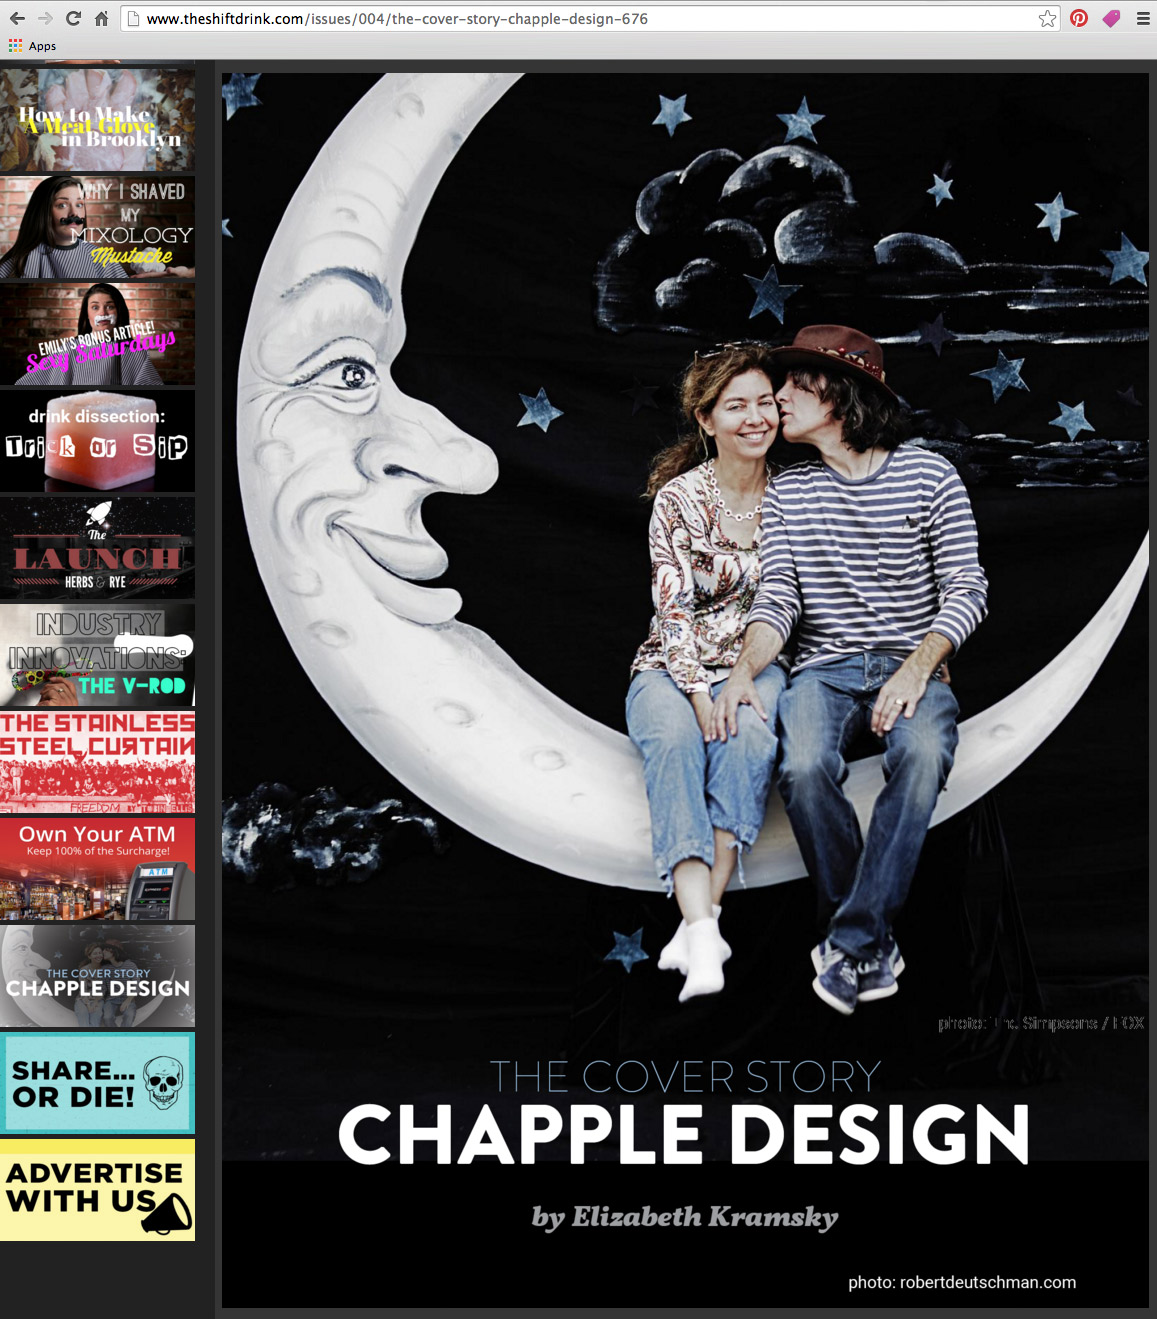 The ShiftDrink cover story: Chapple Design